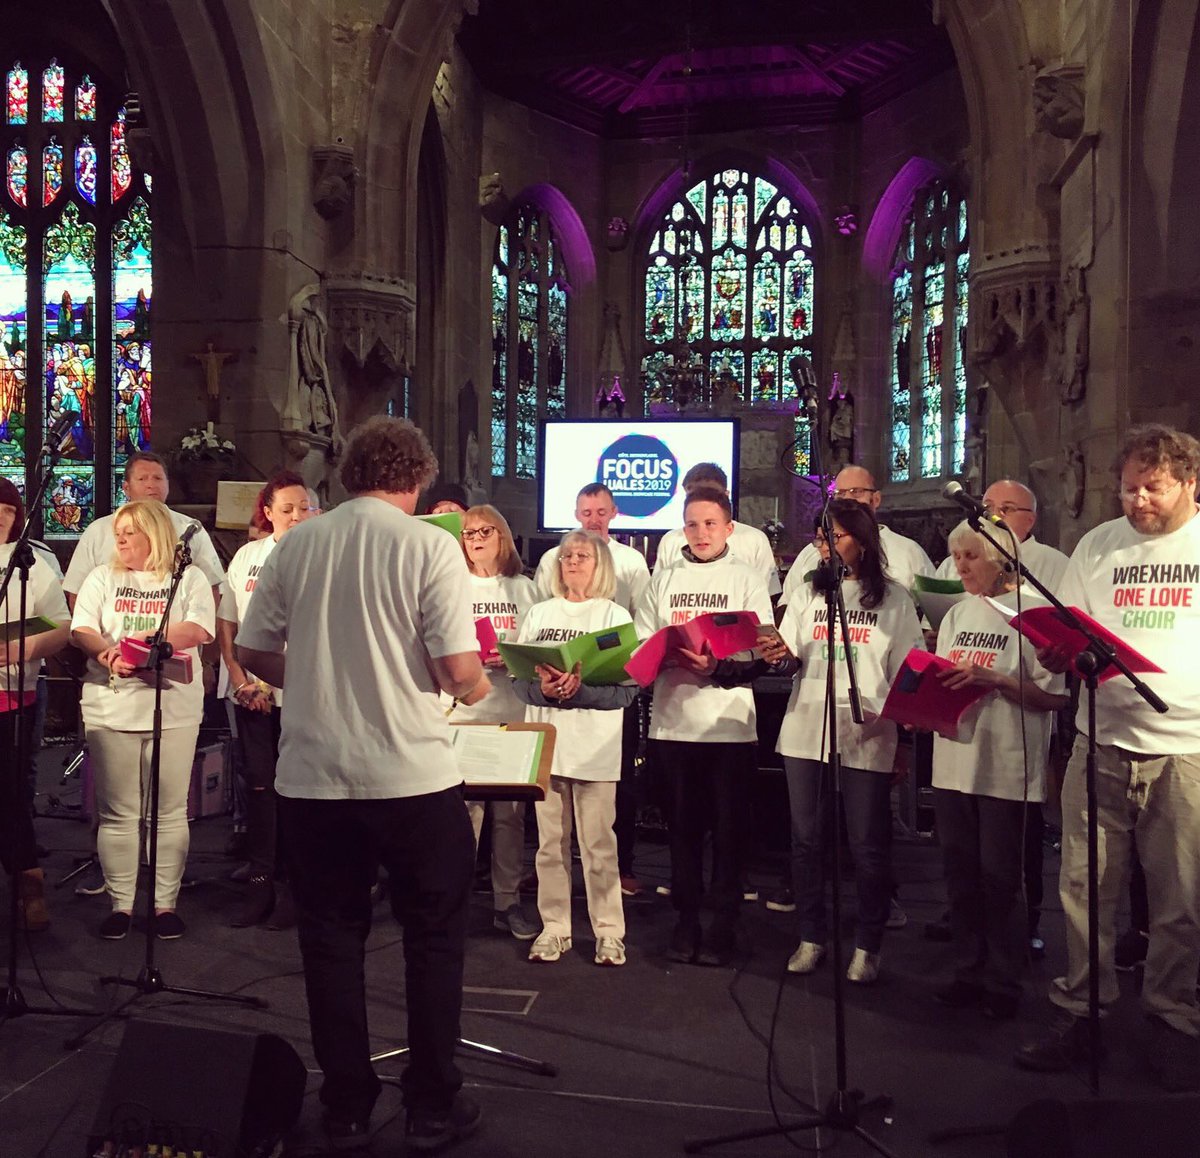 Such a fab picture of our choir on stage at @FocusWales on Saturday! We had a great time at @stgileswrexham - thanks to all those who joined us and support us!